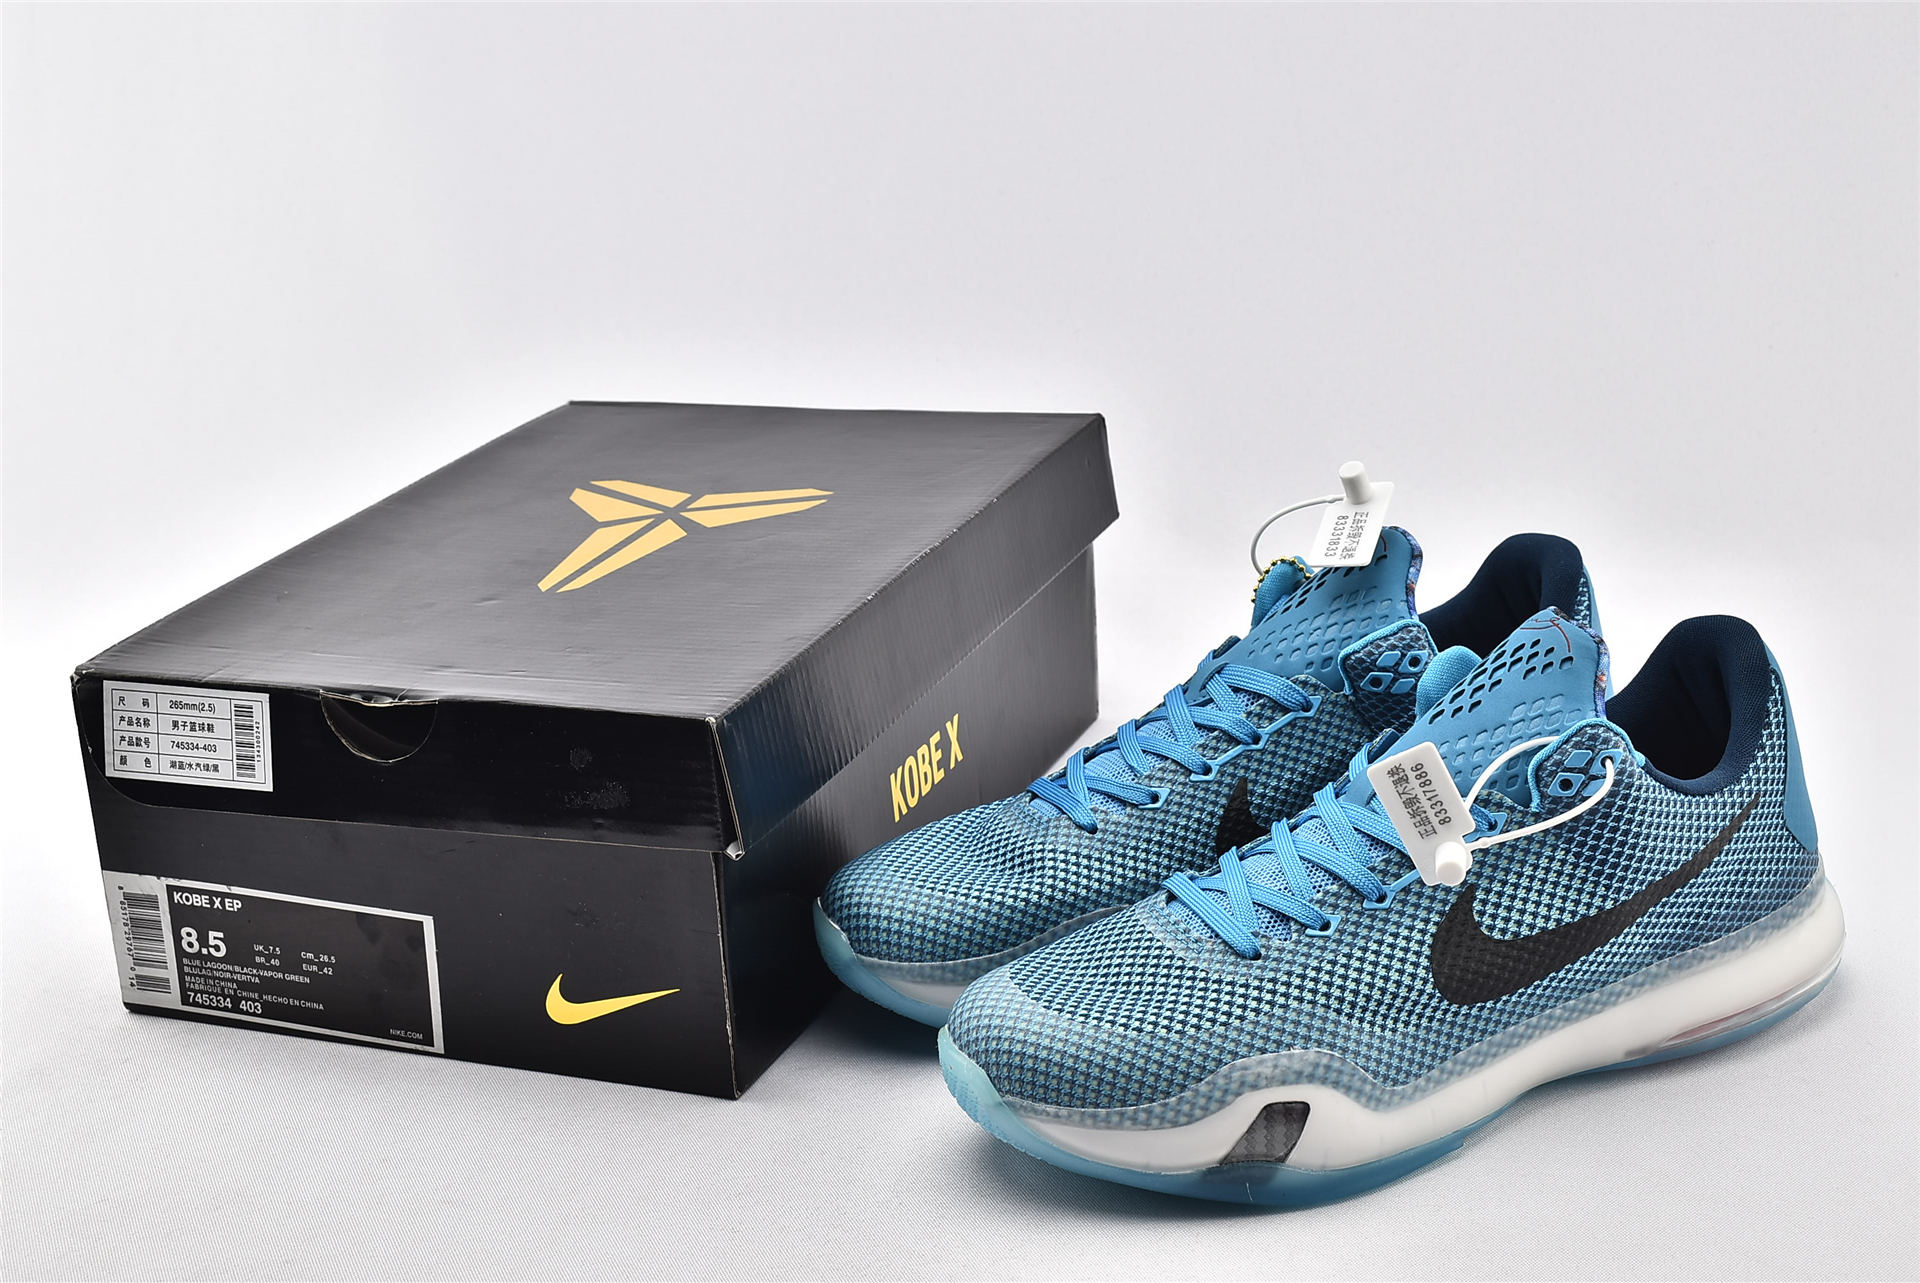 kobe 10 shoes for sale